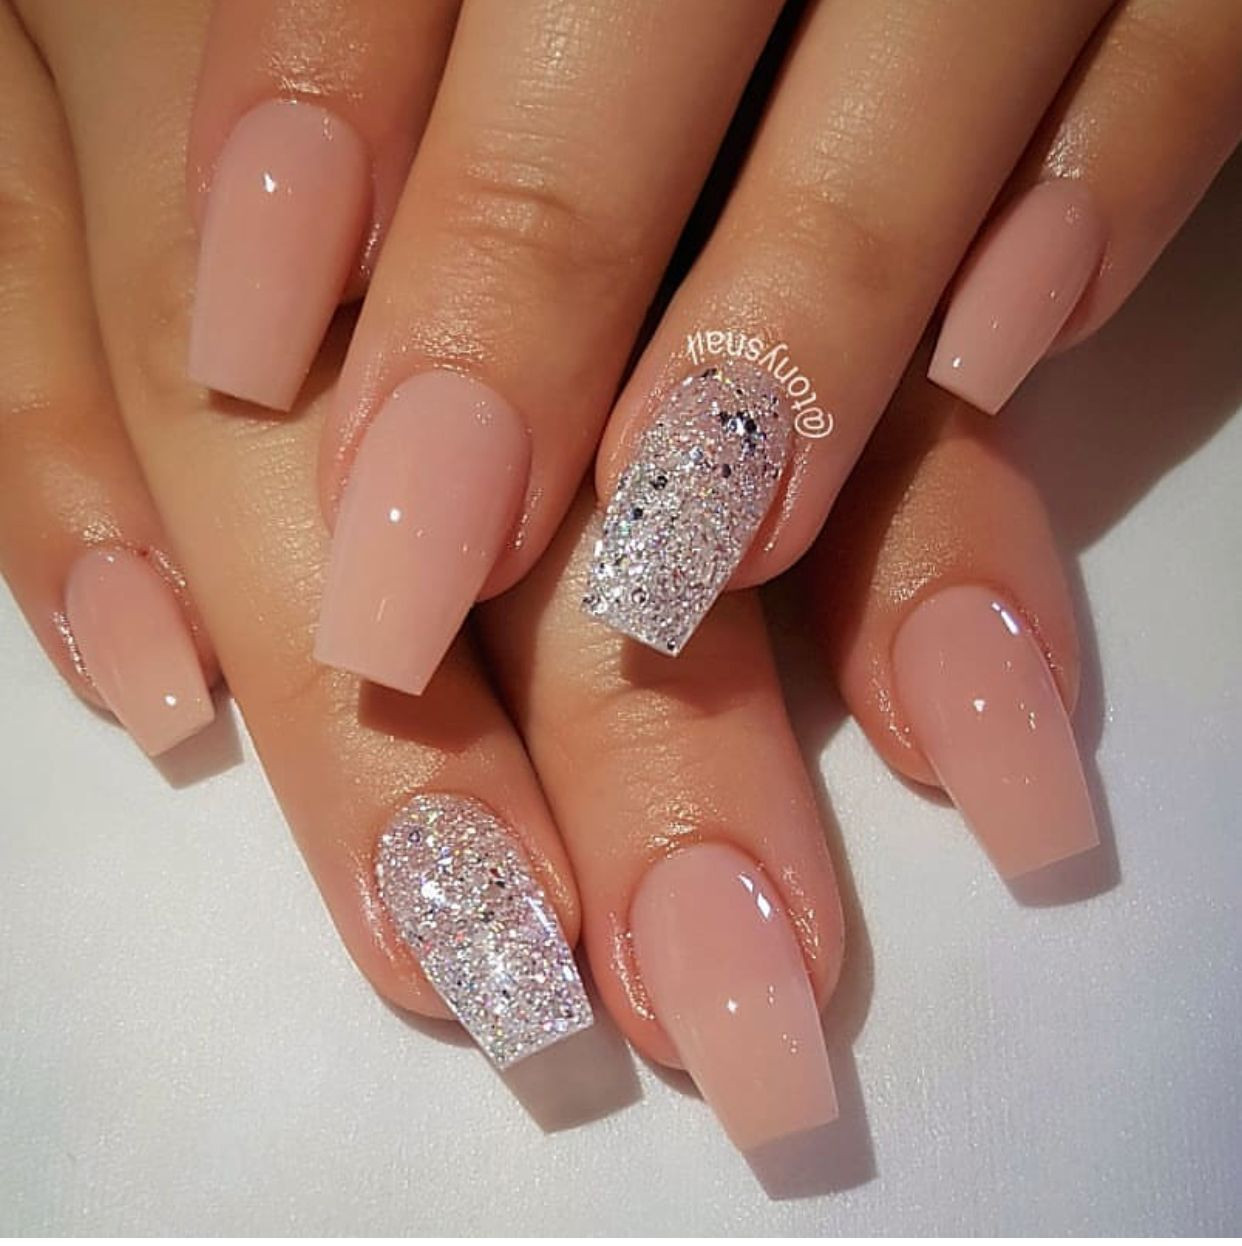 Nails With Silver Glitter
 Nail art pink and silver glitter nails in 2019